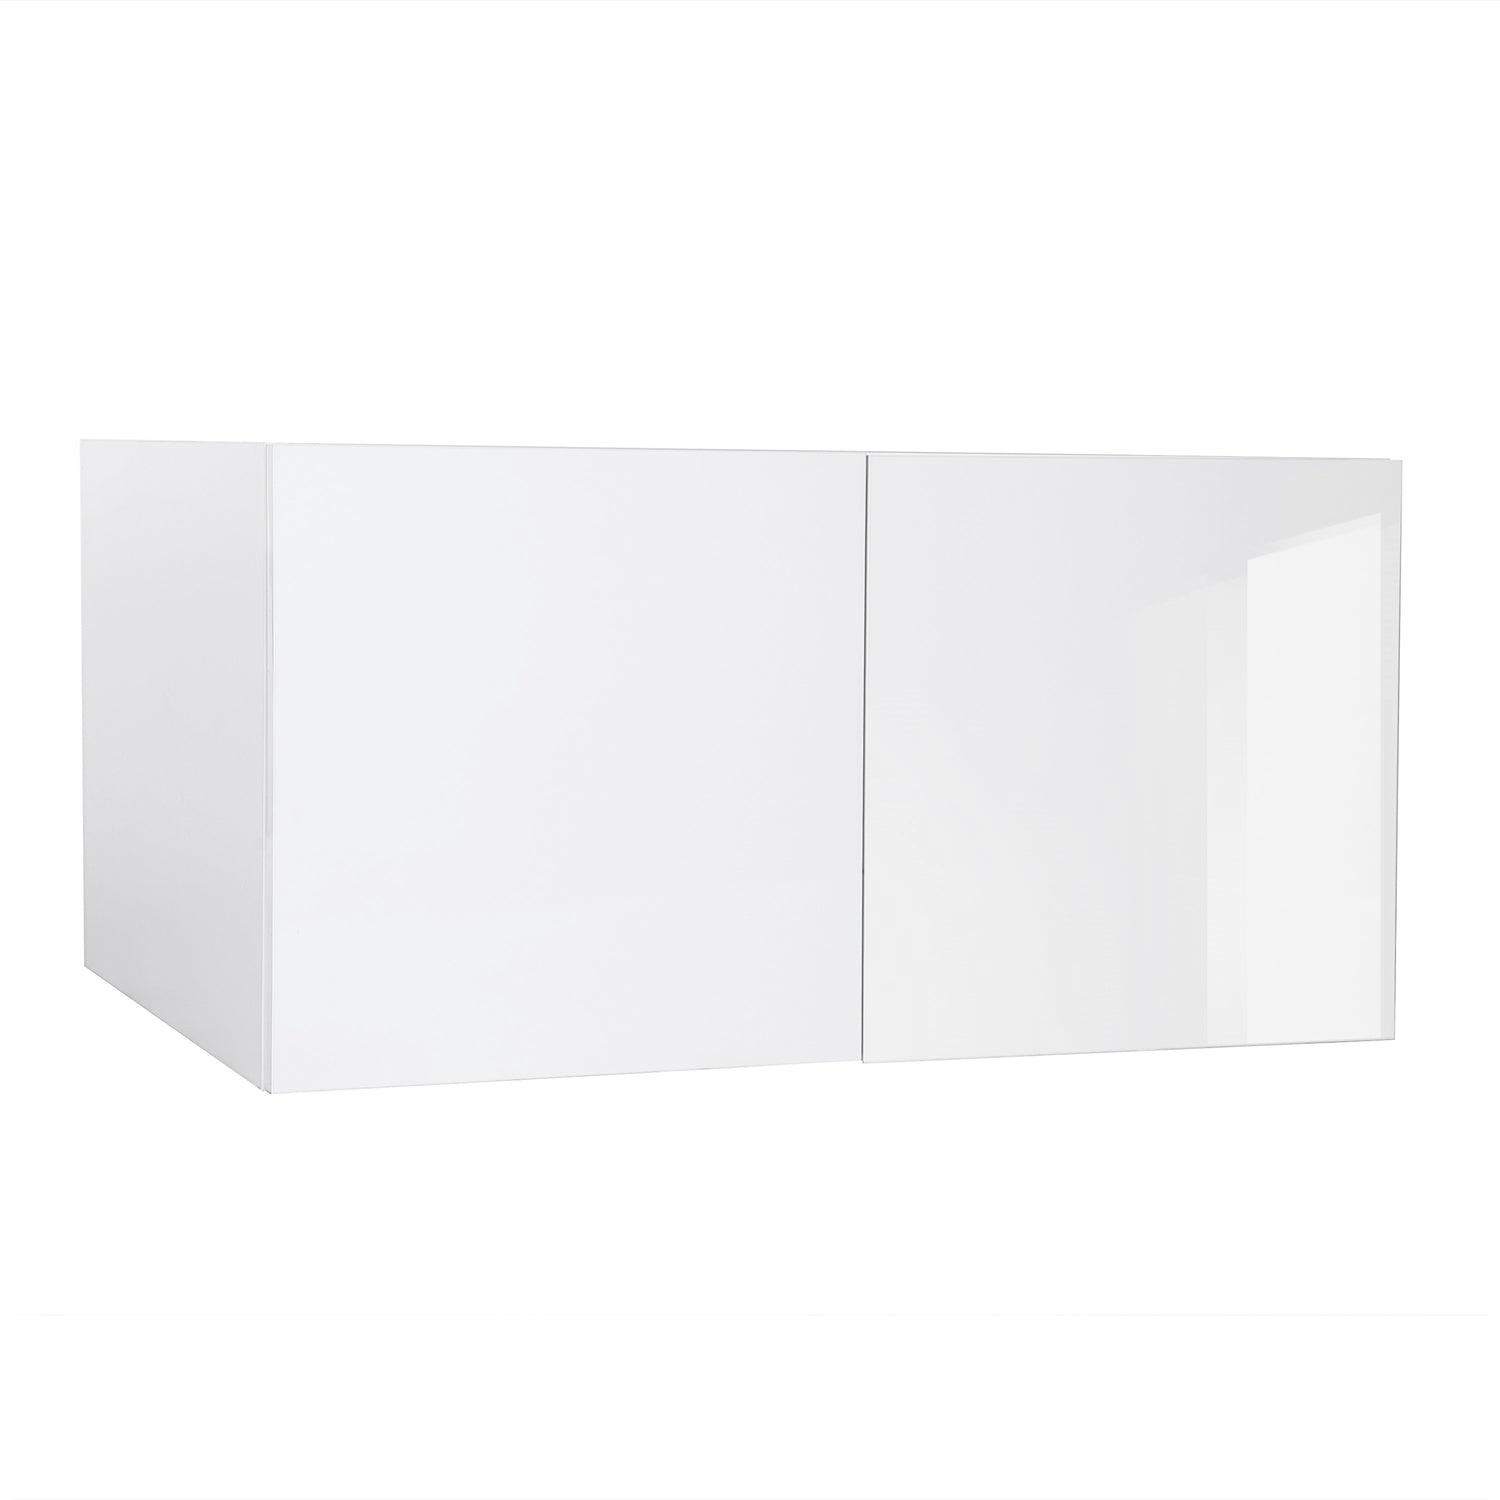 Quick Assemble Modern Style with Soft Close 30 in x 12 in Wall Bridge Kitchen Cabinet (30 in W x 12 in H x 12 in D) -  Pro-Edge HD